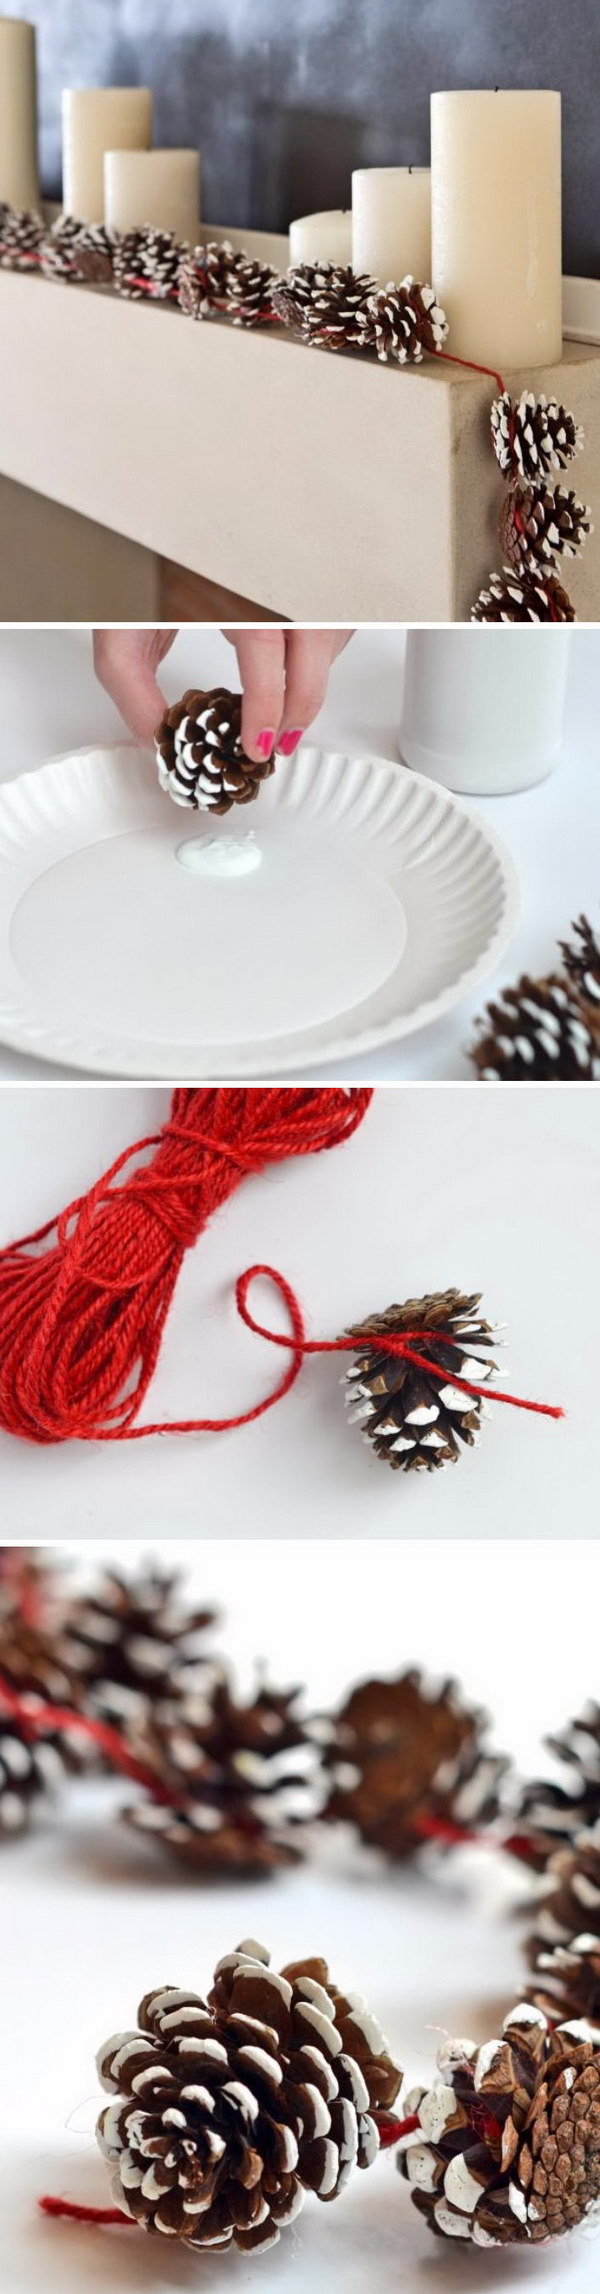 25 Awesome DIY Christmas Decorating Ideas and Tutorials 2017